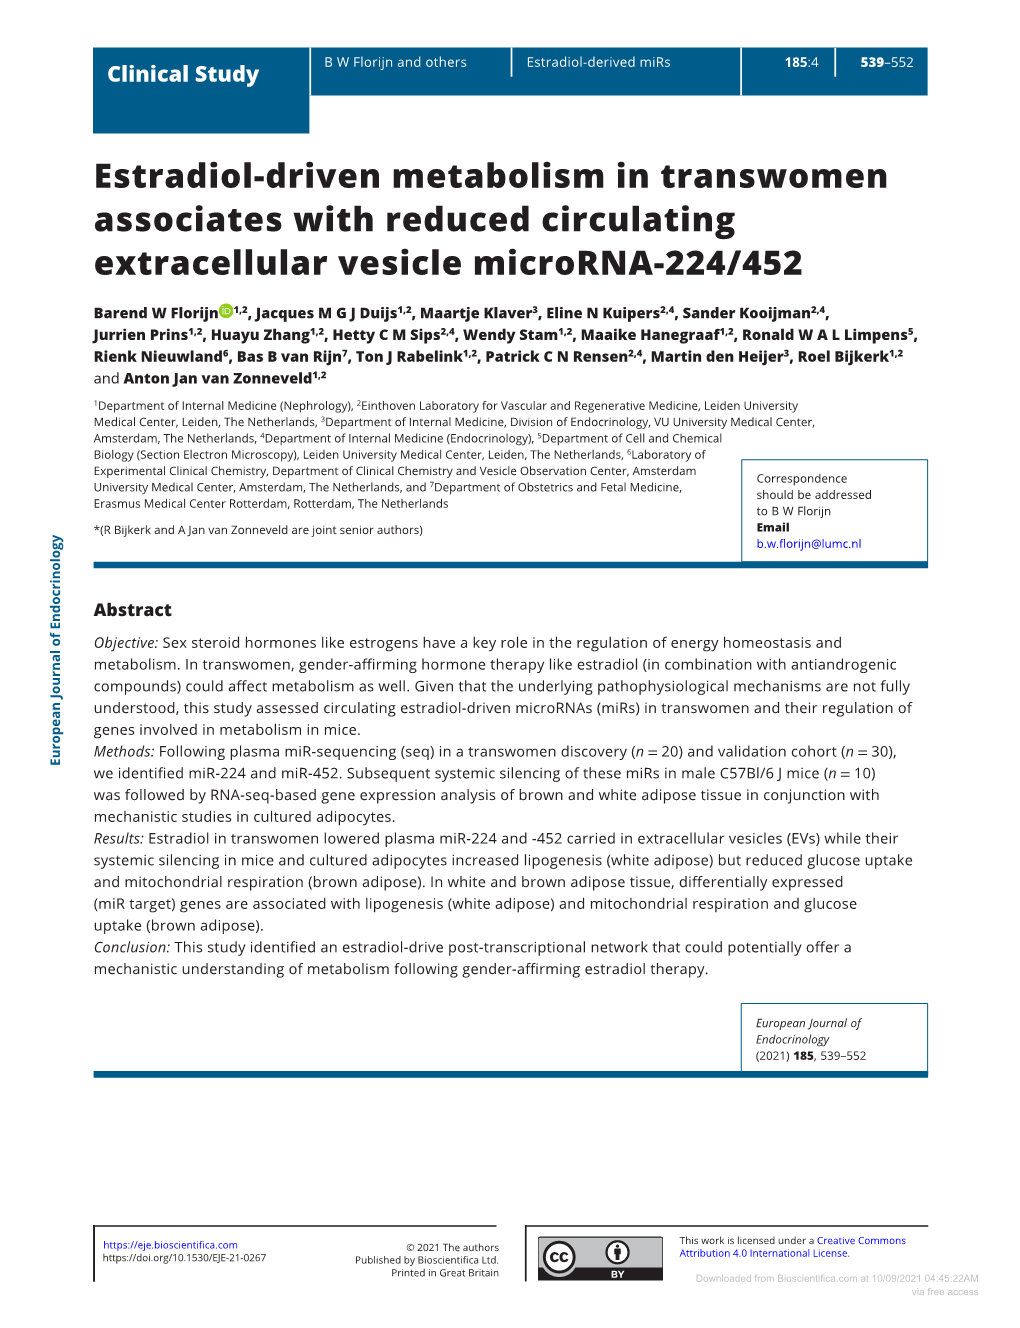 Estradiol-Driven Metabolism in Transwomen Associates with Reduced Circulating Extracellular Vesicle Microrna-224/452